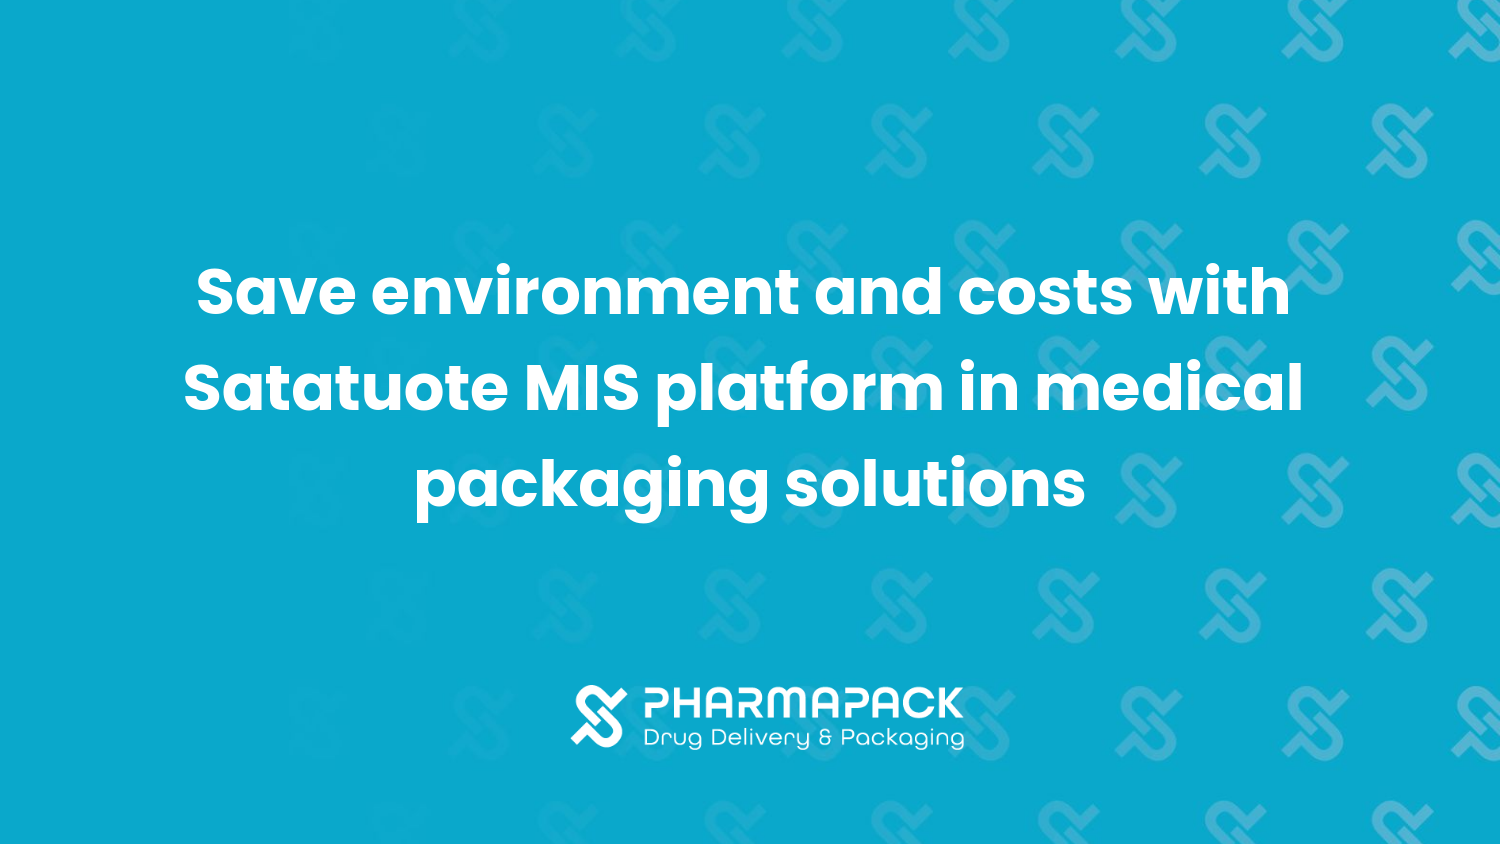 Save Environment and Costs with Satatuote MIS Platform in Medical Packaging Solutions